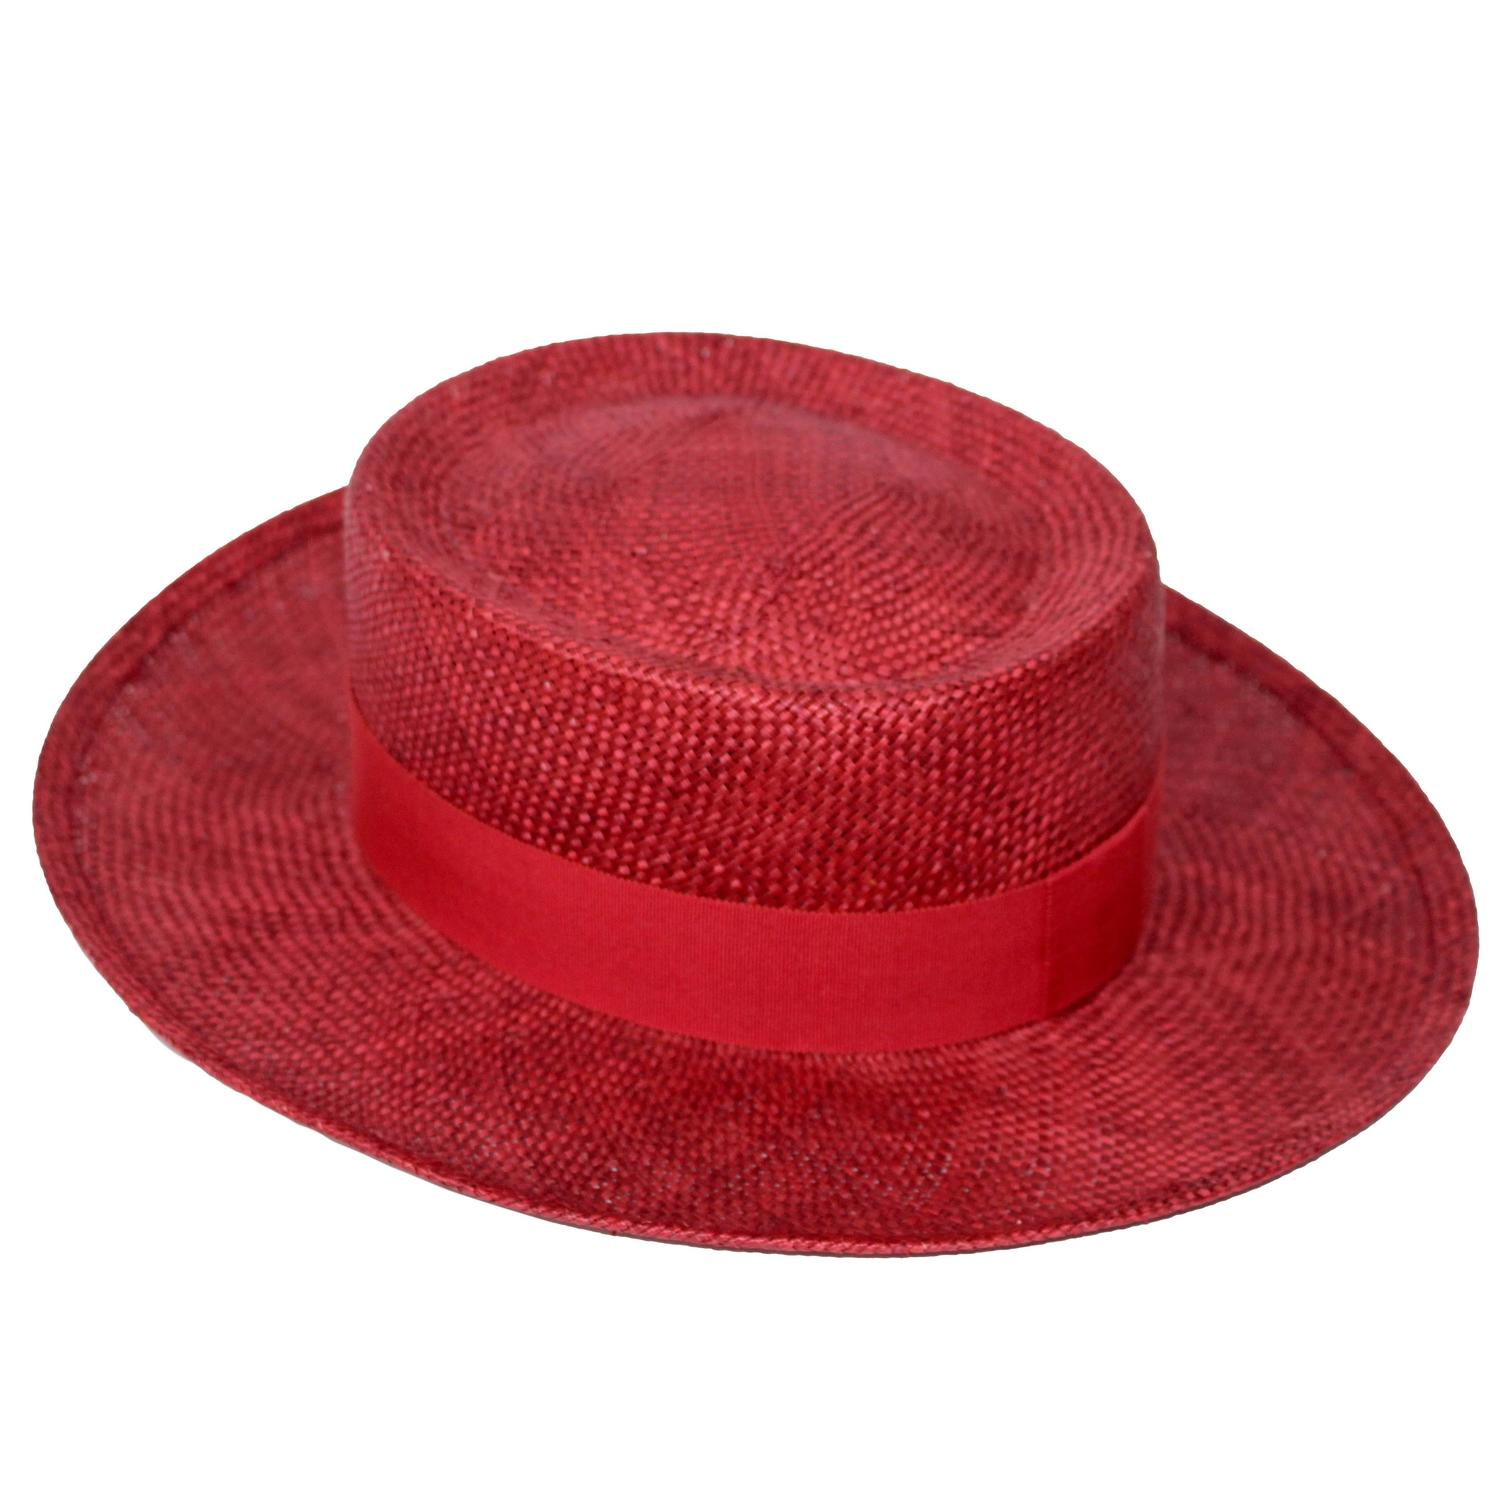 Vintage Chanel Cherry Red Straw Hat For Sale at 1stdibs